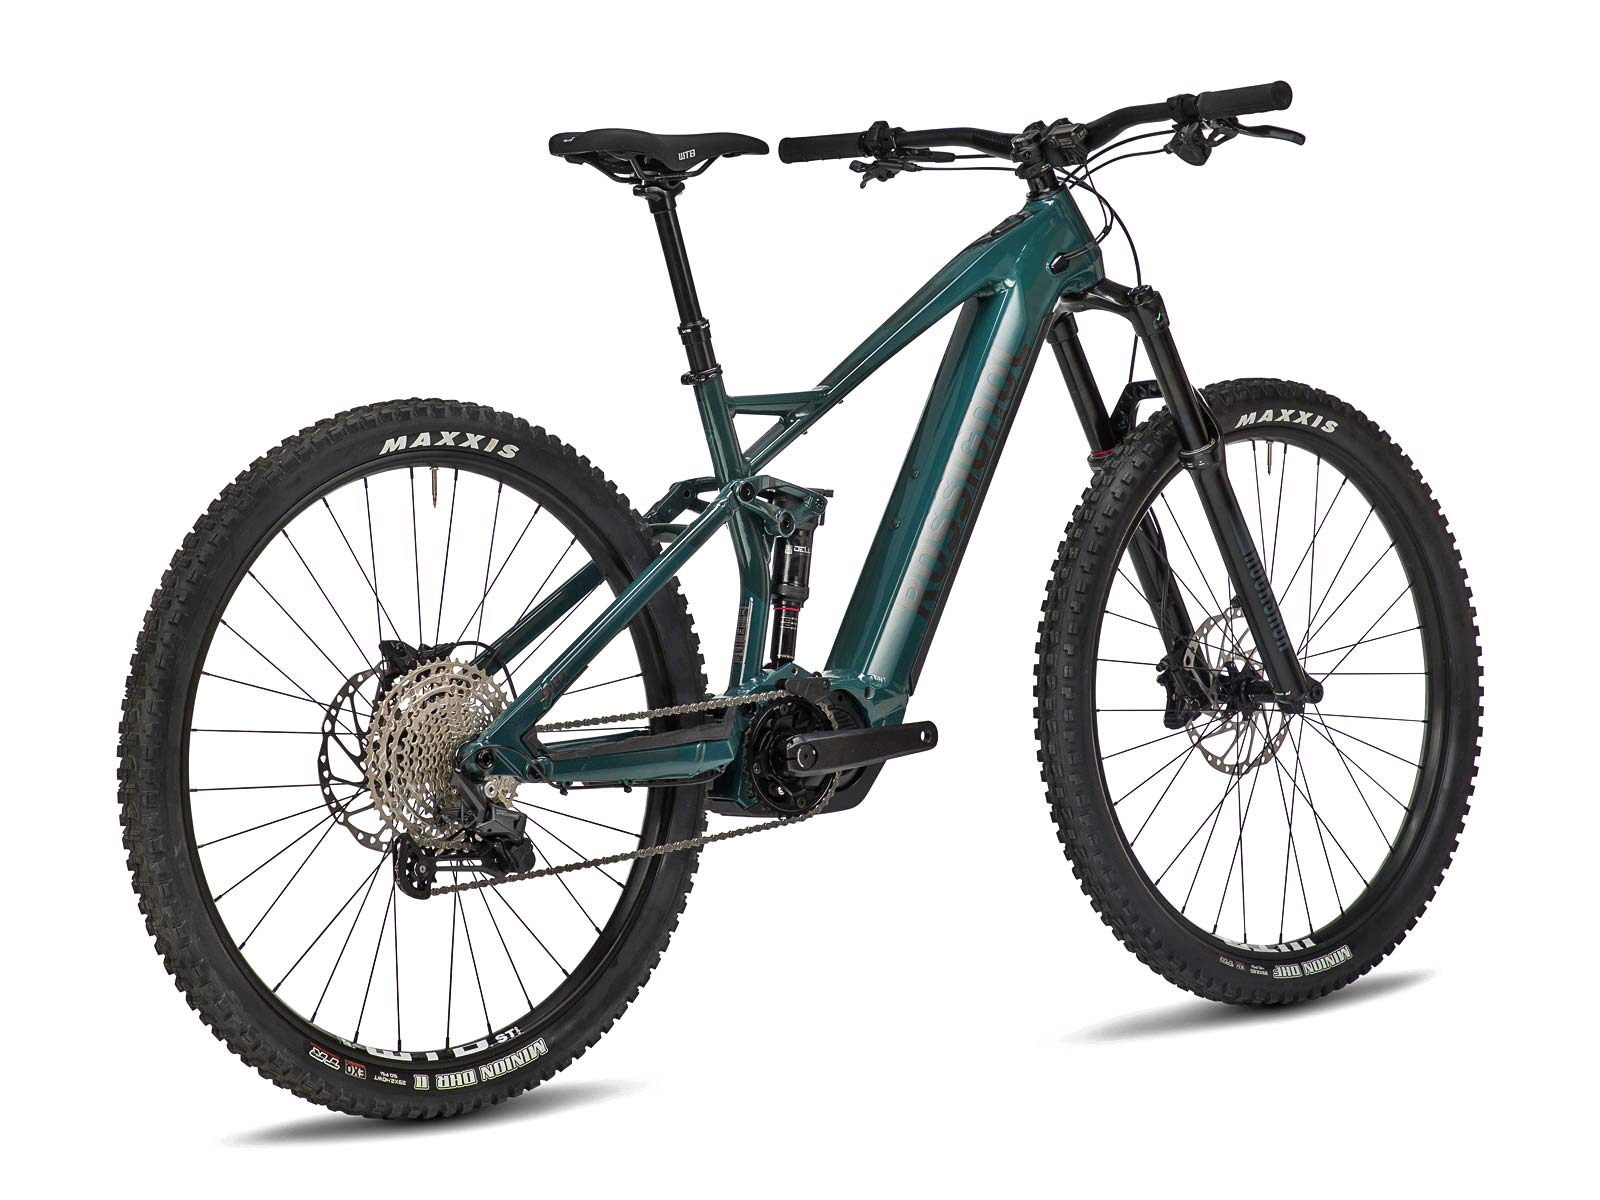 Affordable 2022 Rossignol alloy mountain bikes, Mandate Shift rear